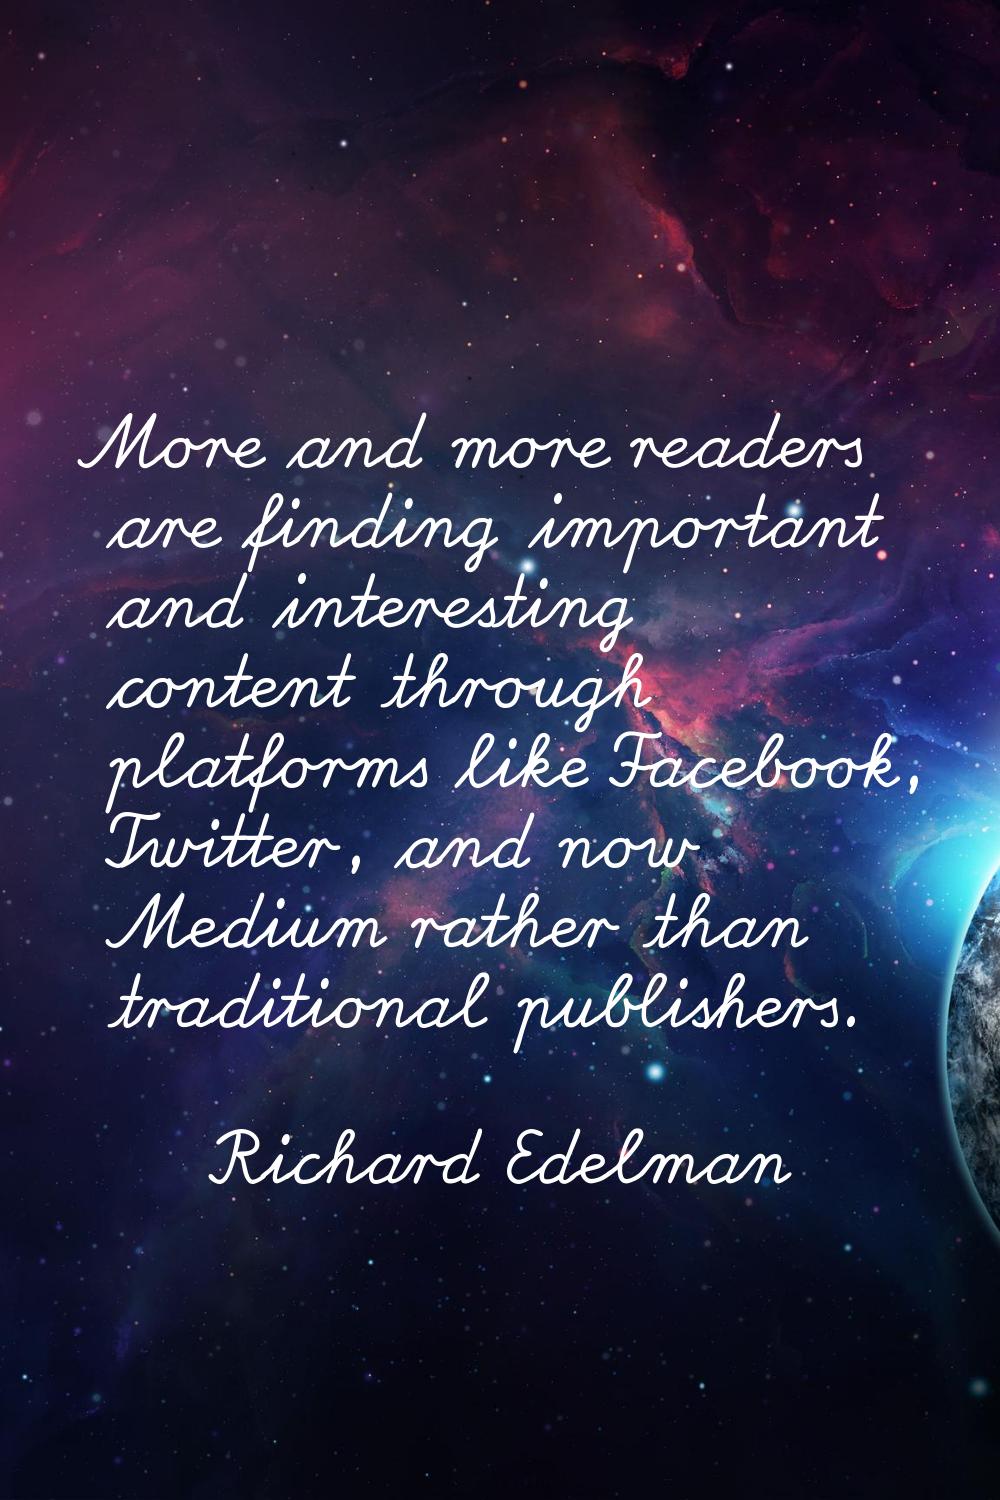 More and more readers are finding important and interesting content through platforms like Facebook